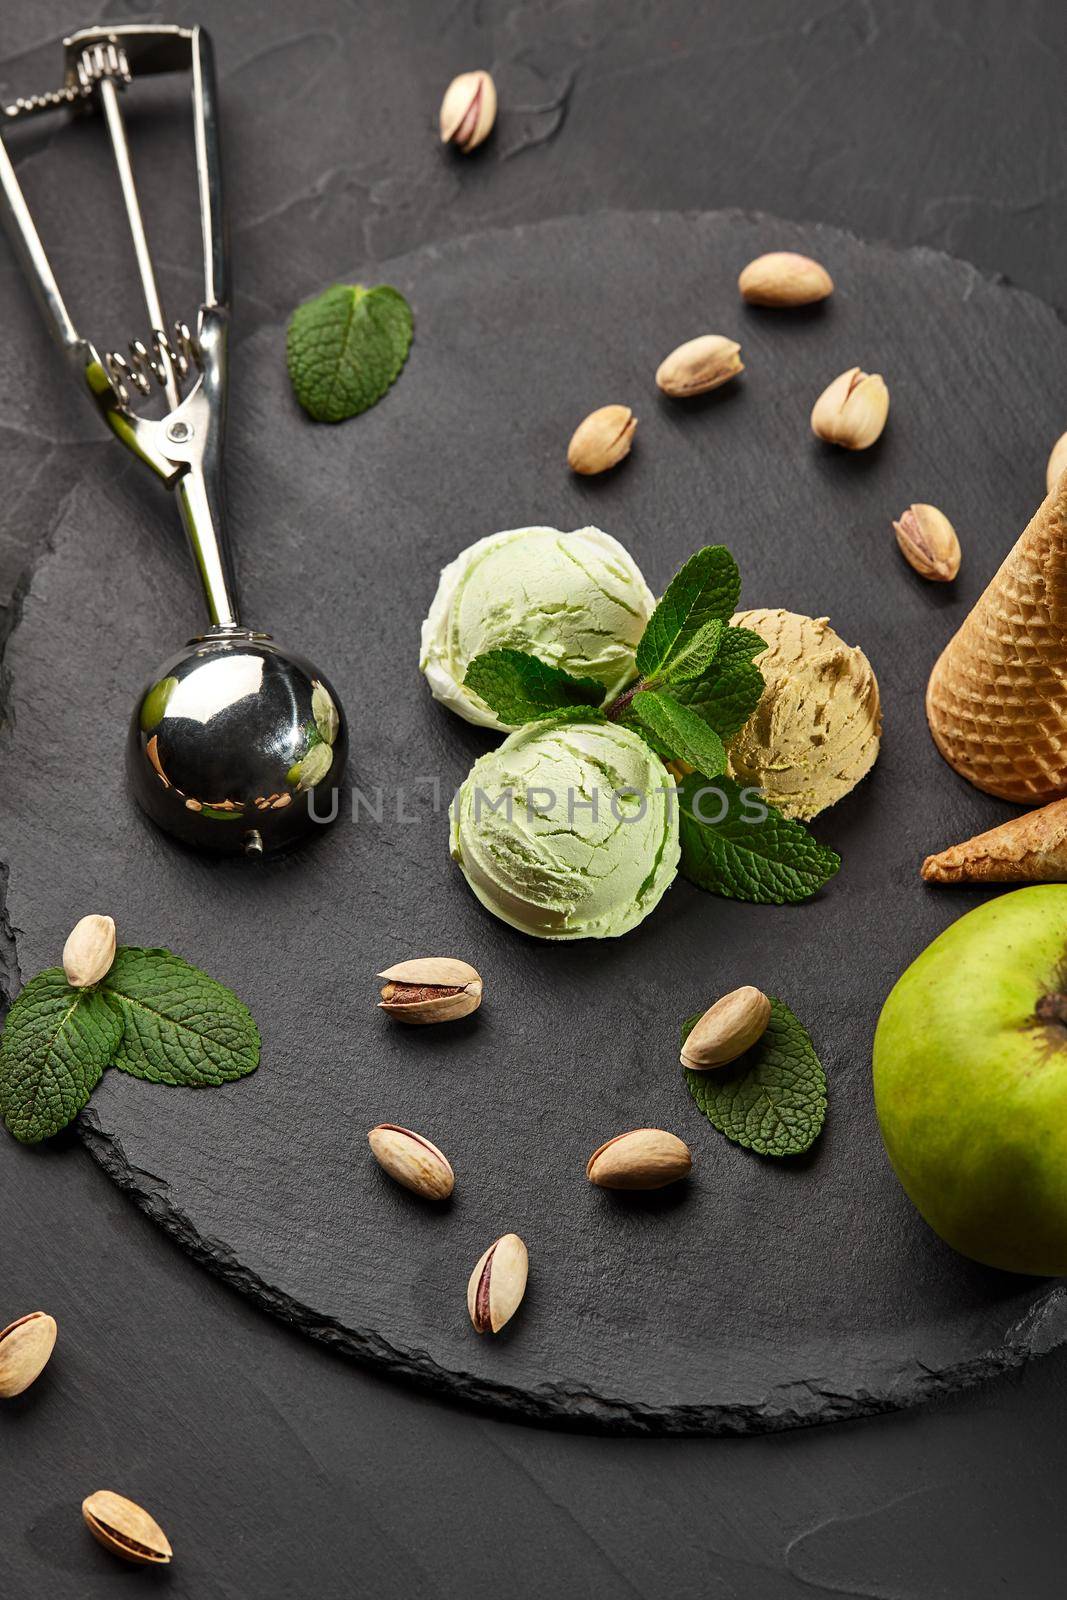 Close-up shot of a piquant pistachio and chocolate ice cream decorated with fresh mint, apple and scattered nuts, served on a stone slate over a black background. A metal scoop is laying nearby. Top view.